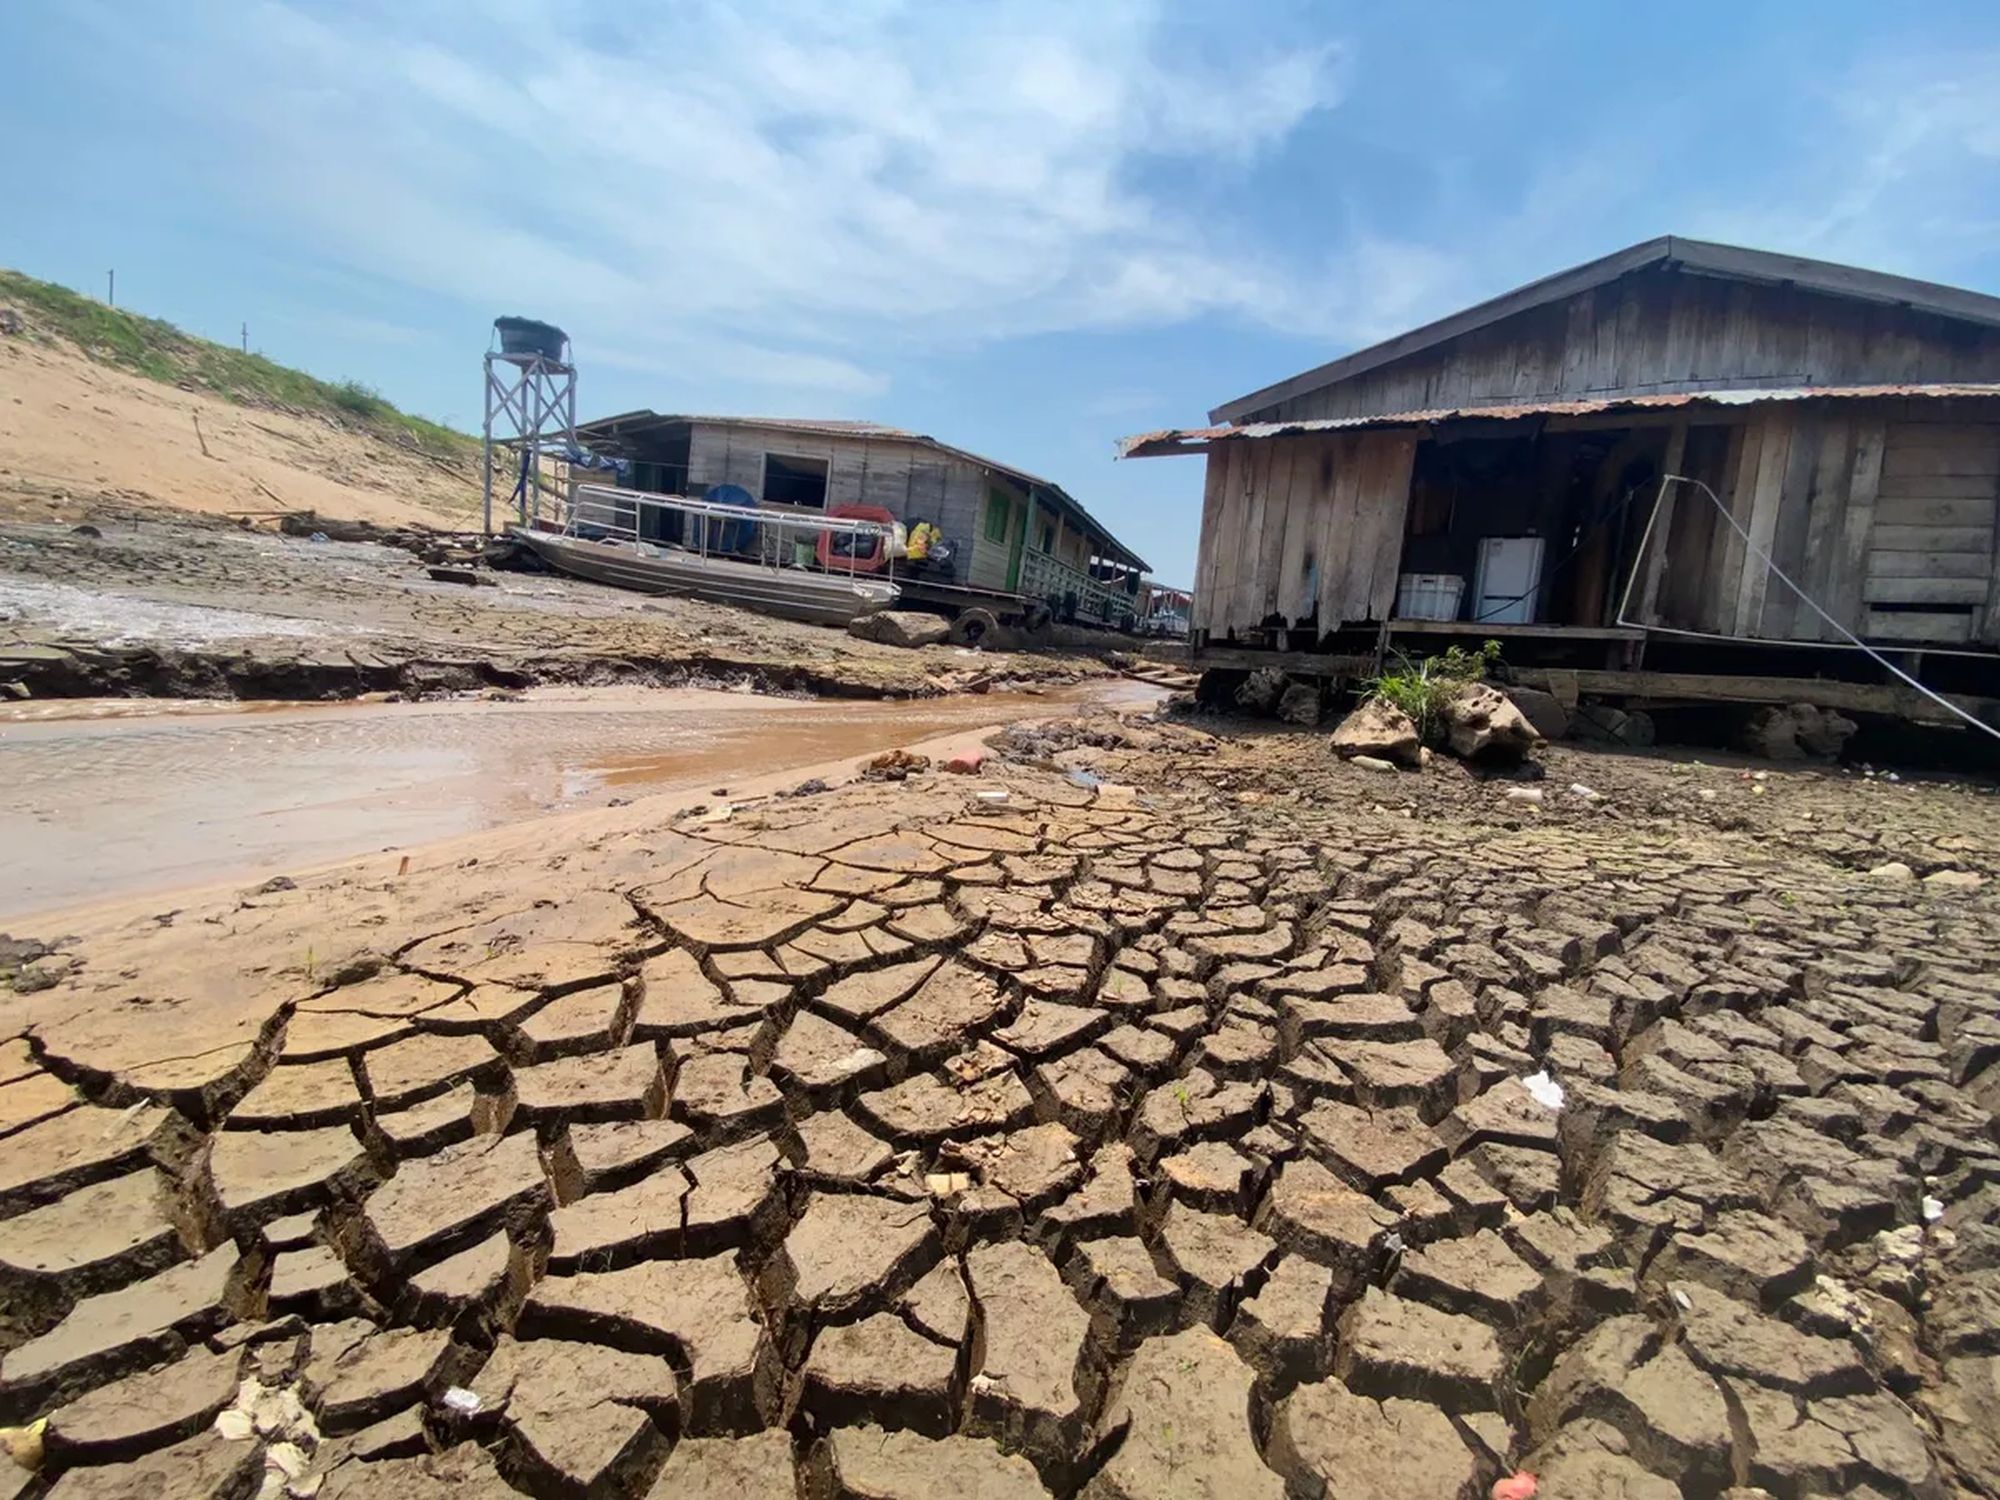 Lake Mauá is the second lake to dry up completely in the East Zone of Manaus because of the severe outflow